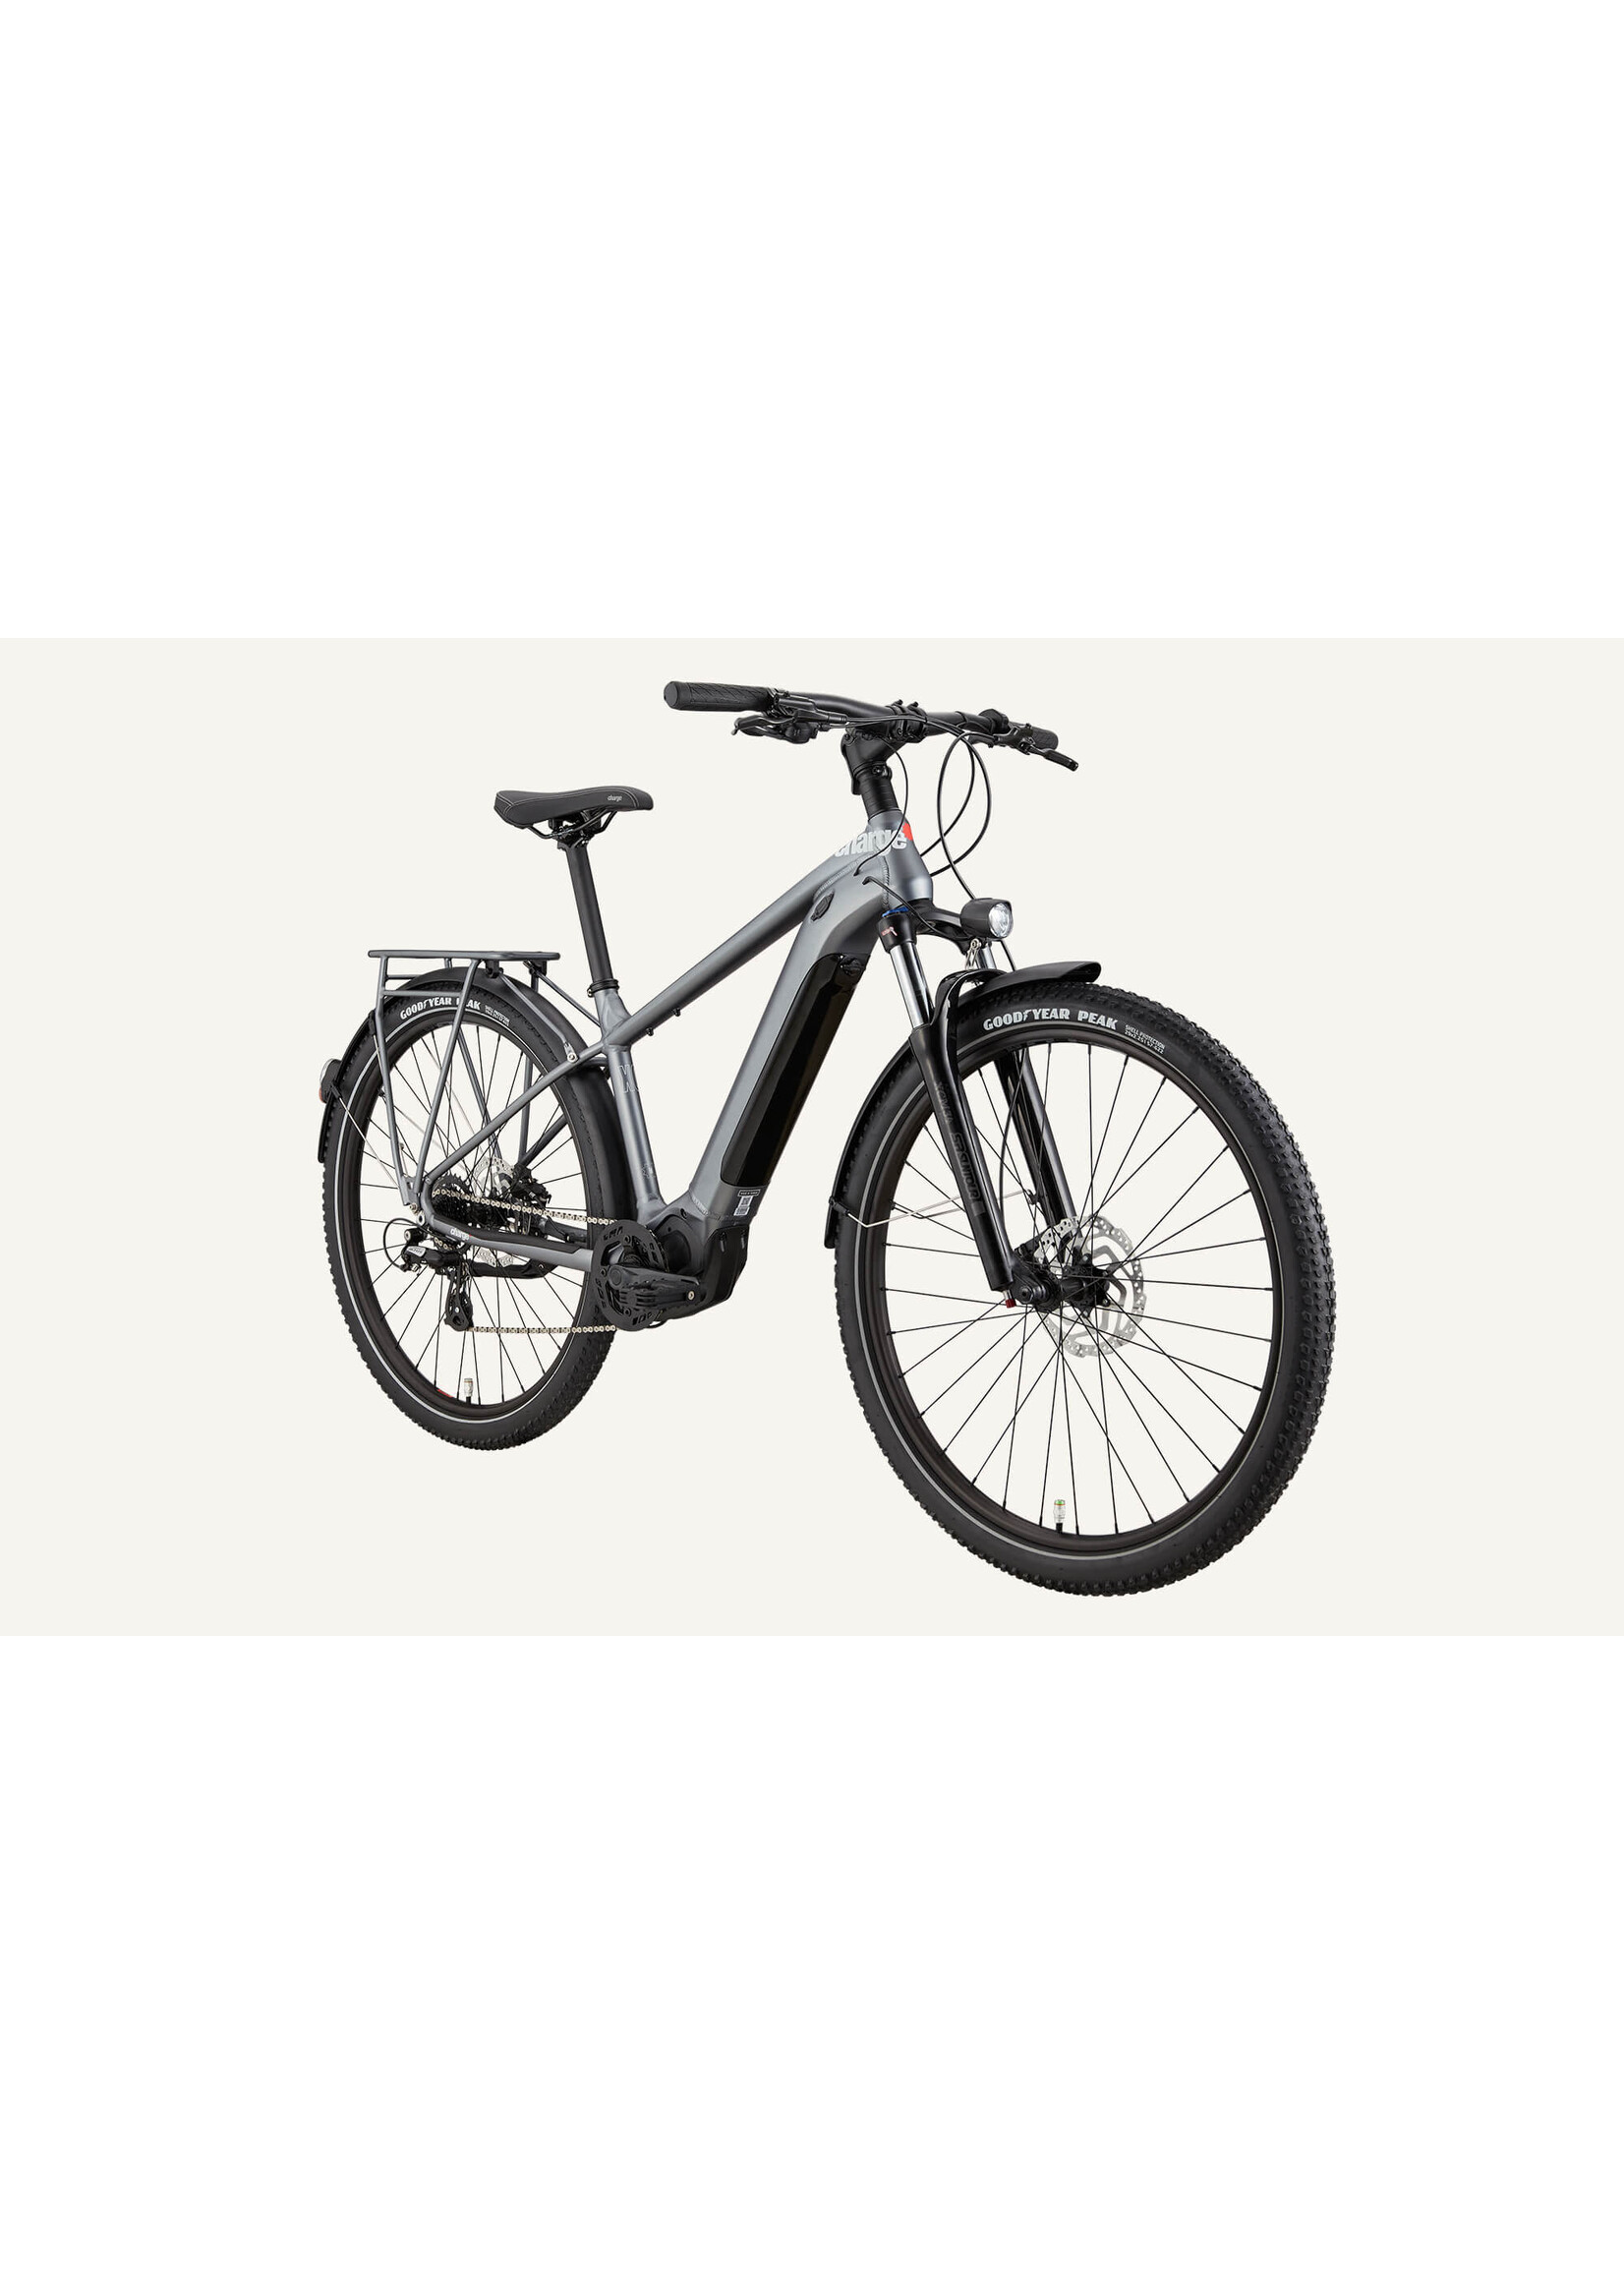 Charge Charge XC Cross Country eBike, GRY LG